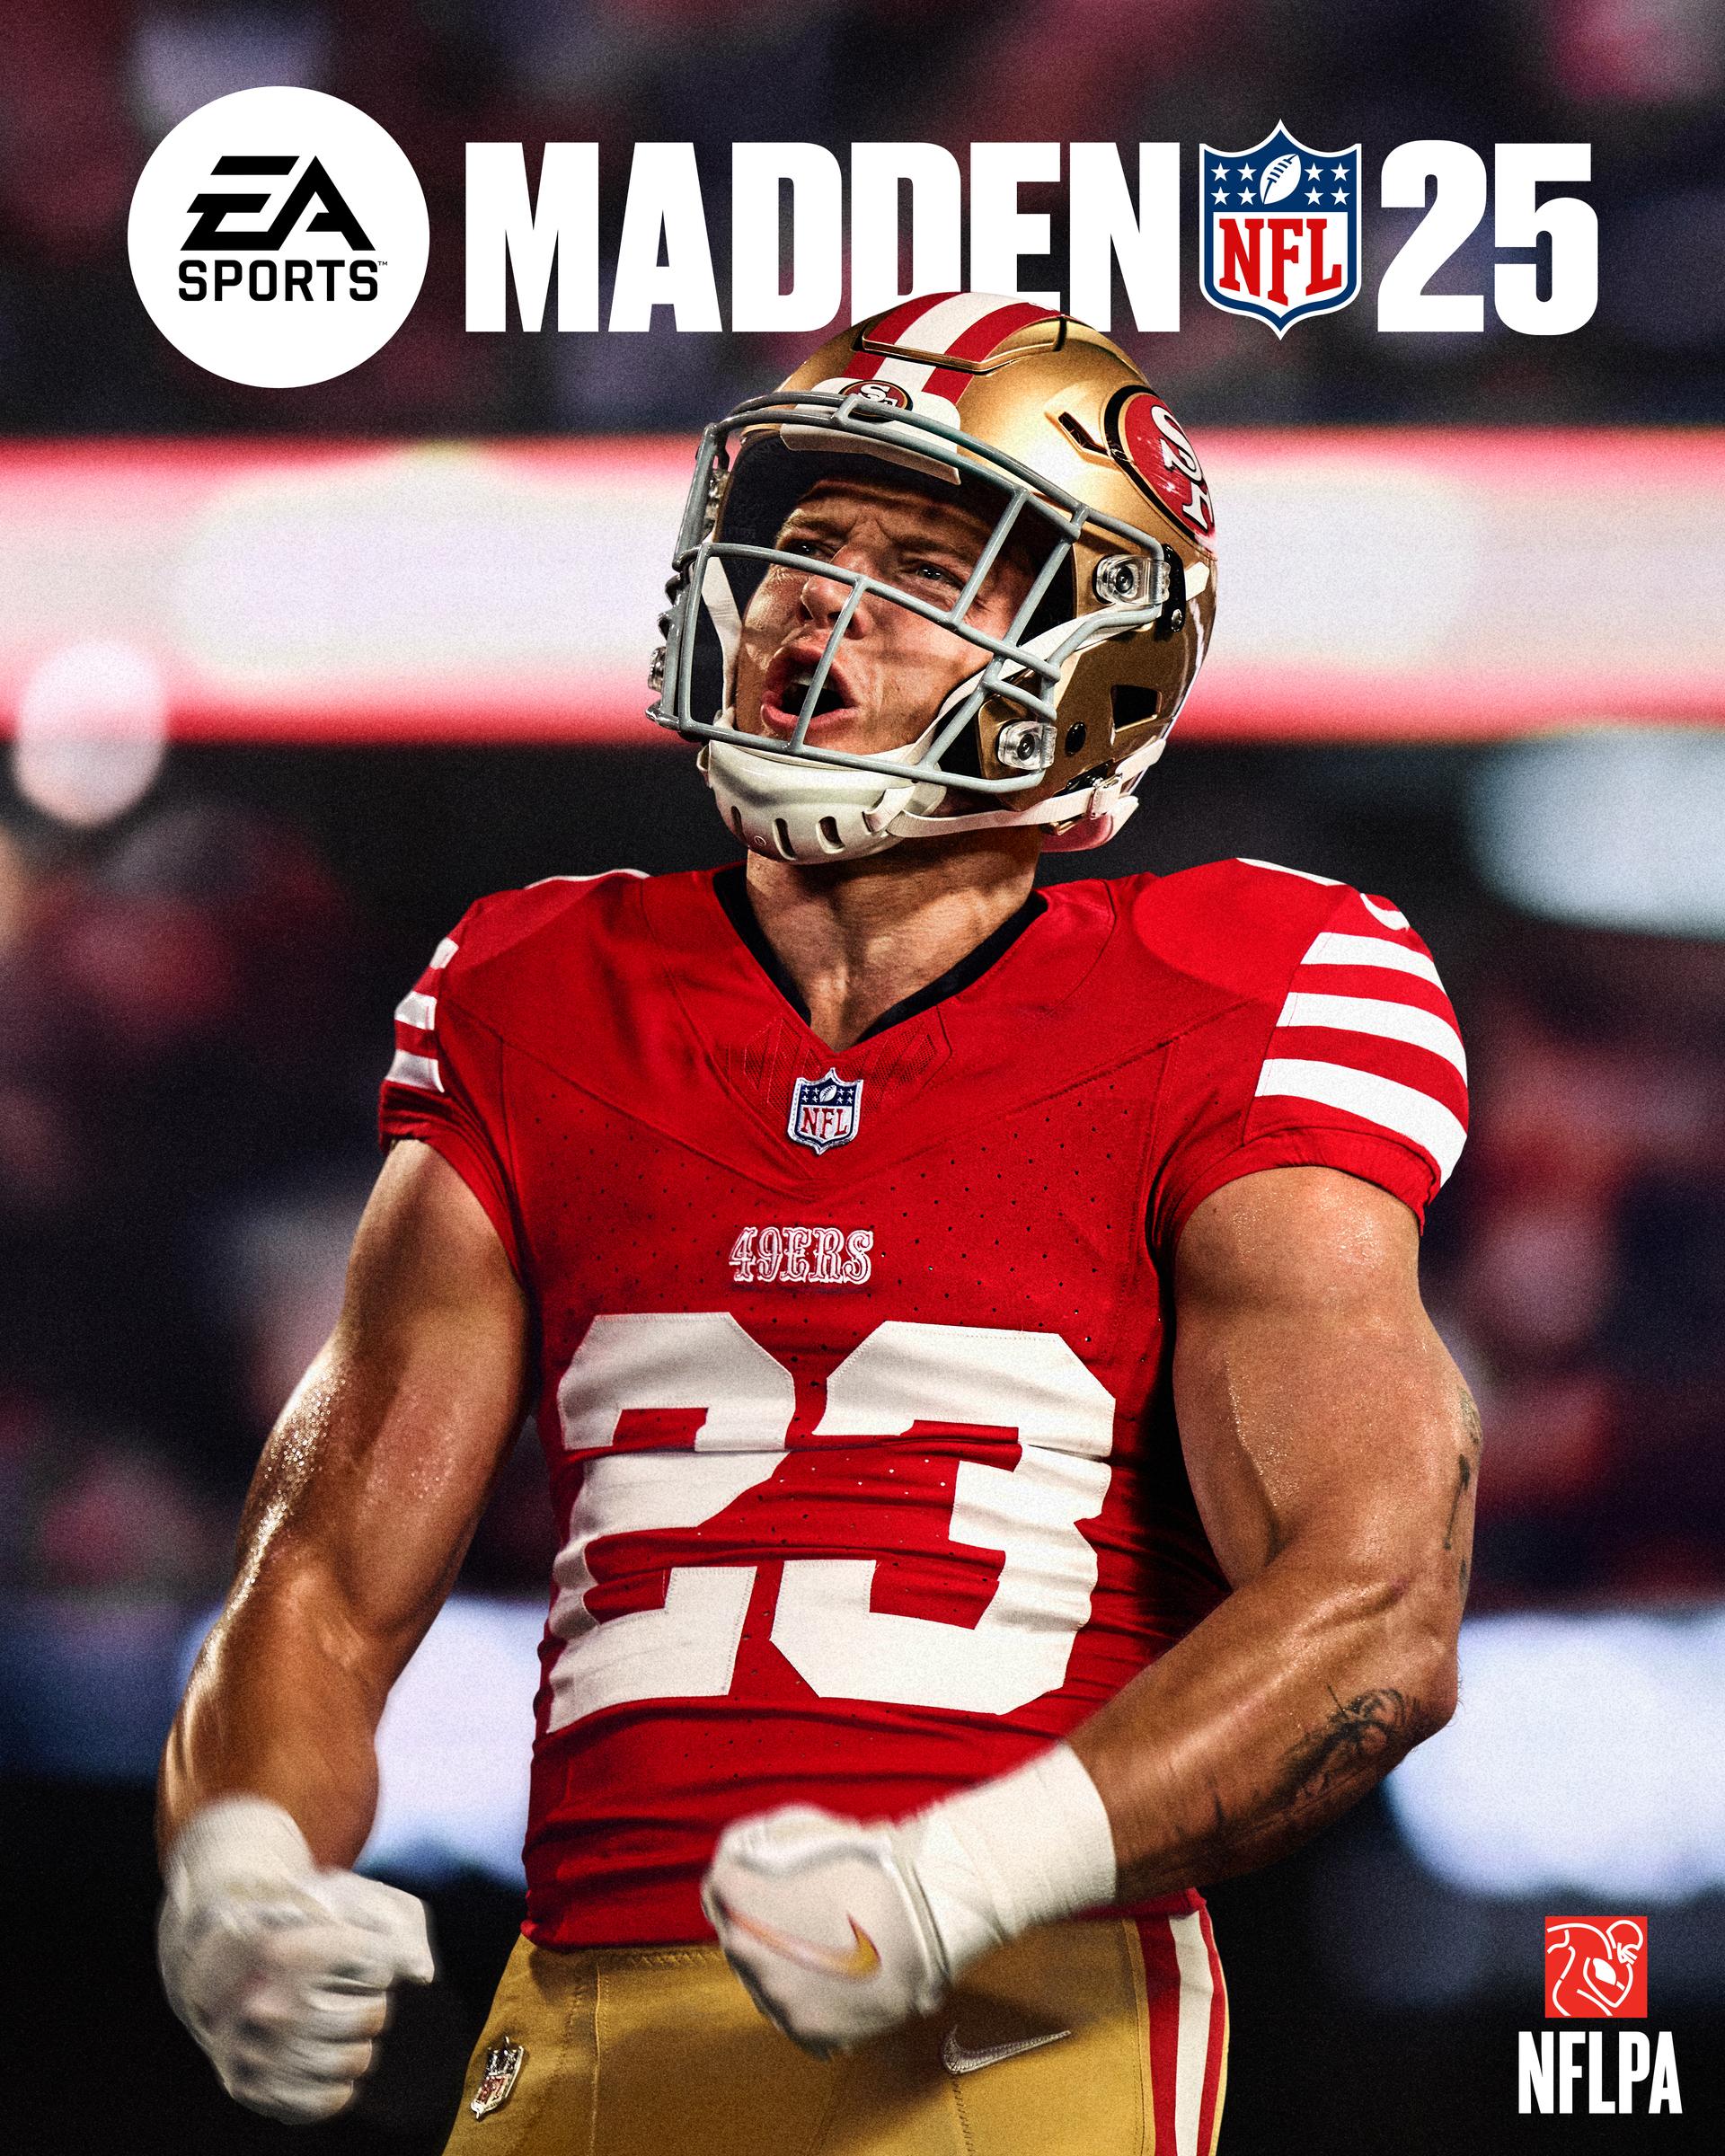 Christian McCaffrey of the San Francisco 49ers celebrating a big play on the cover of Madden NFL 25